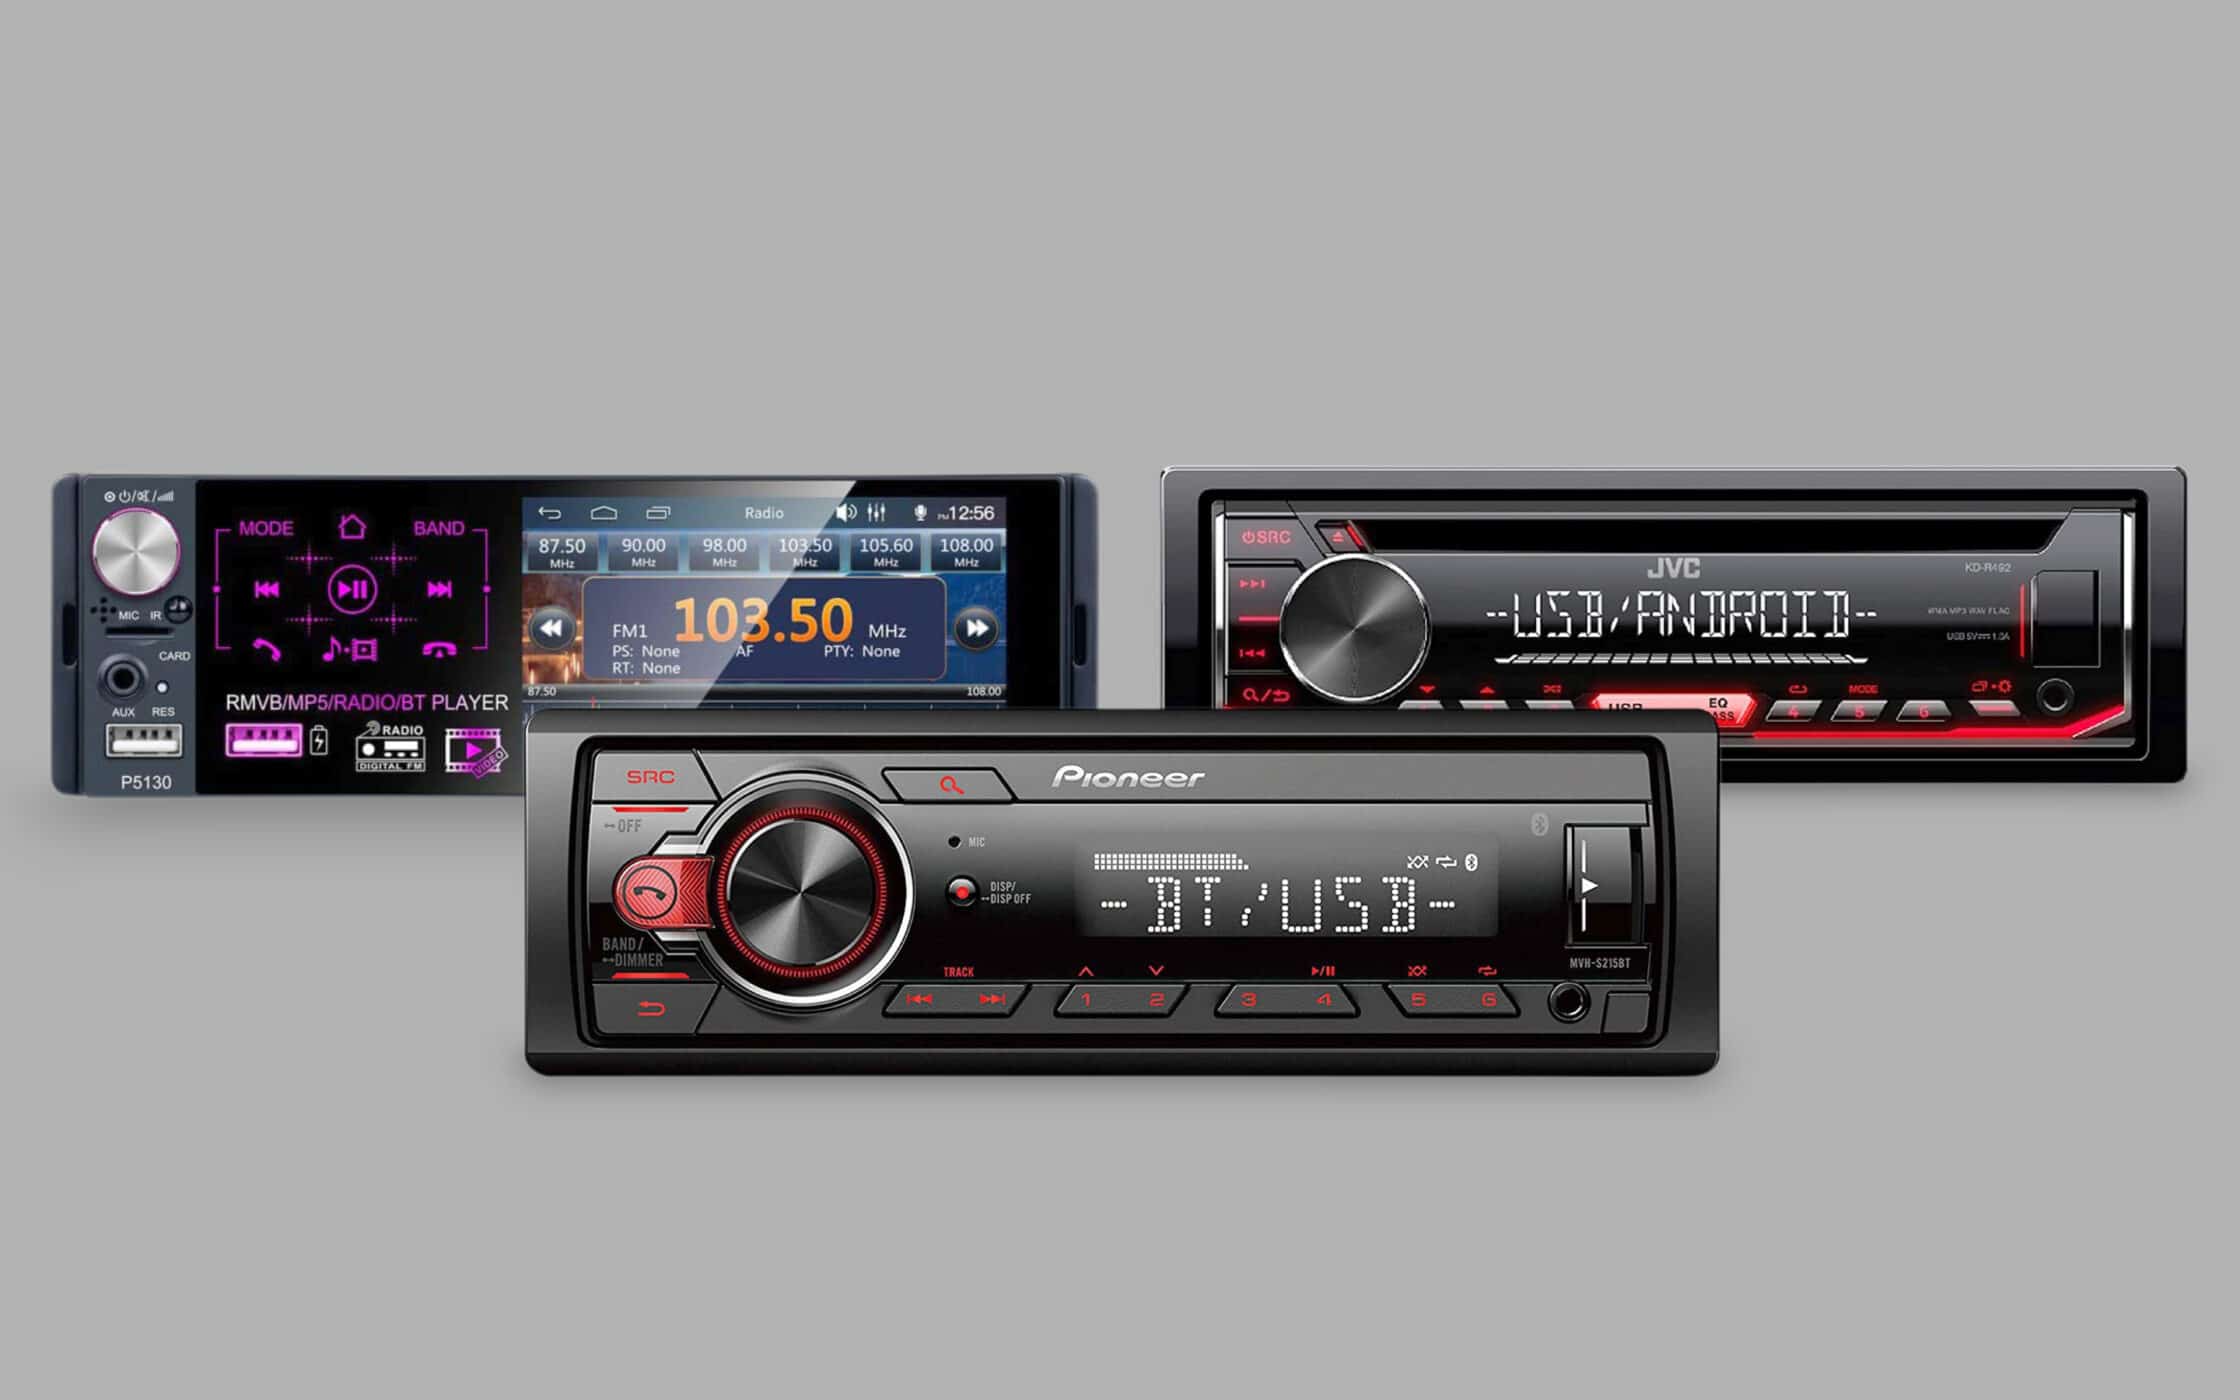 What Is A Single DIN Car Stereo?